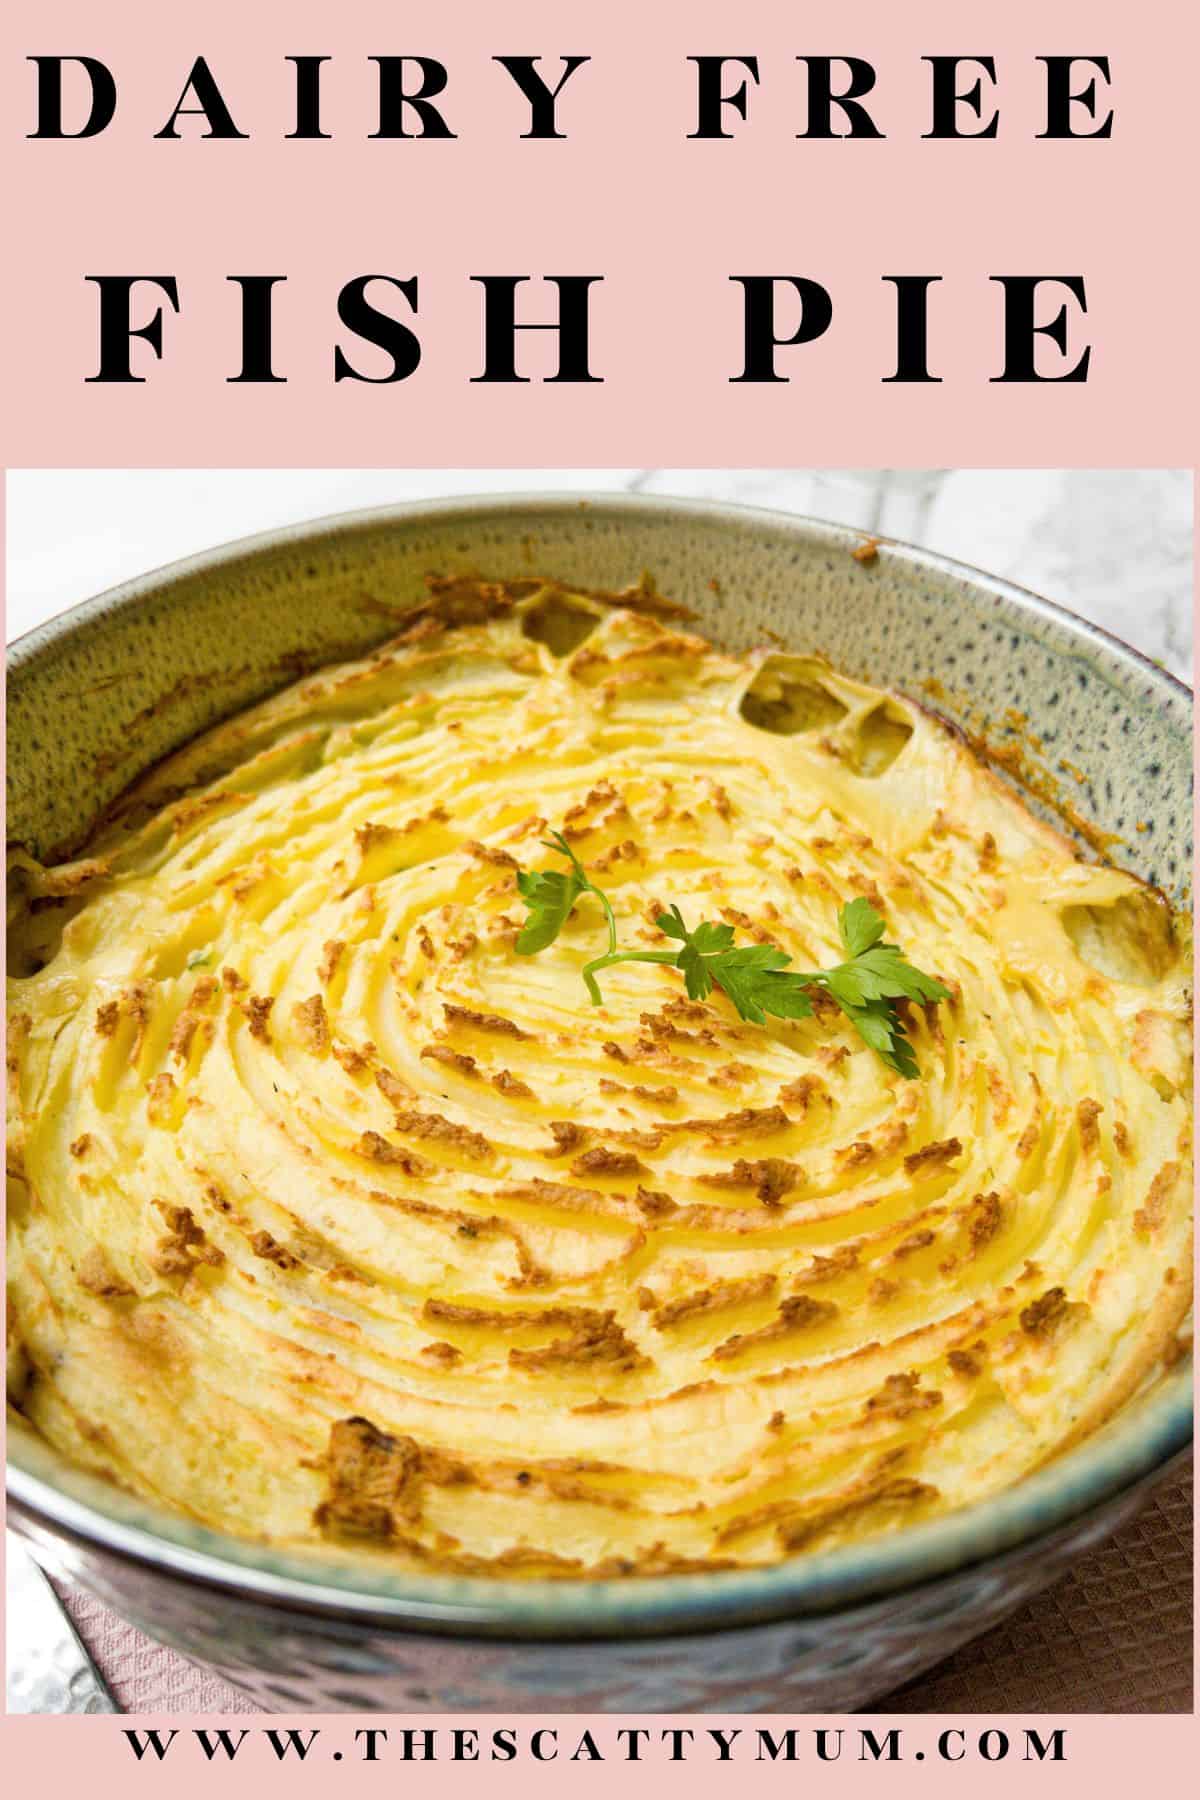 Pinterest image for dairy free fish pie.